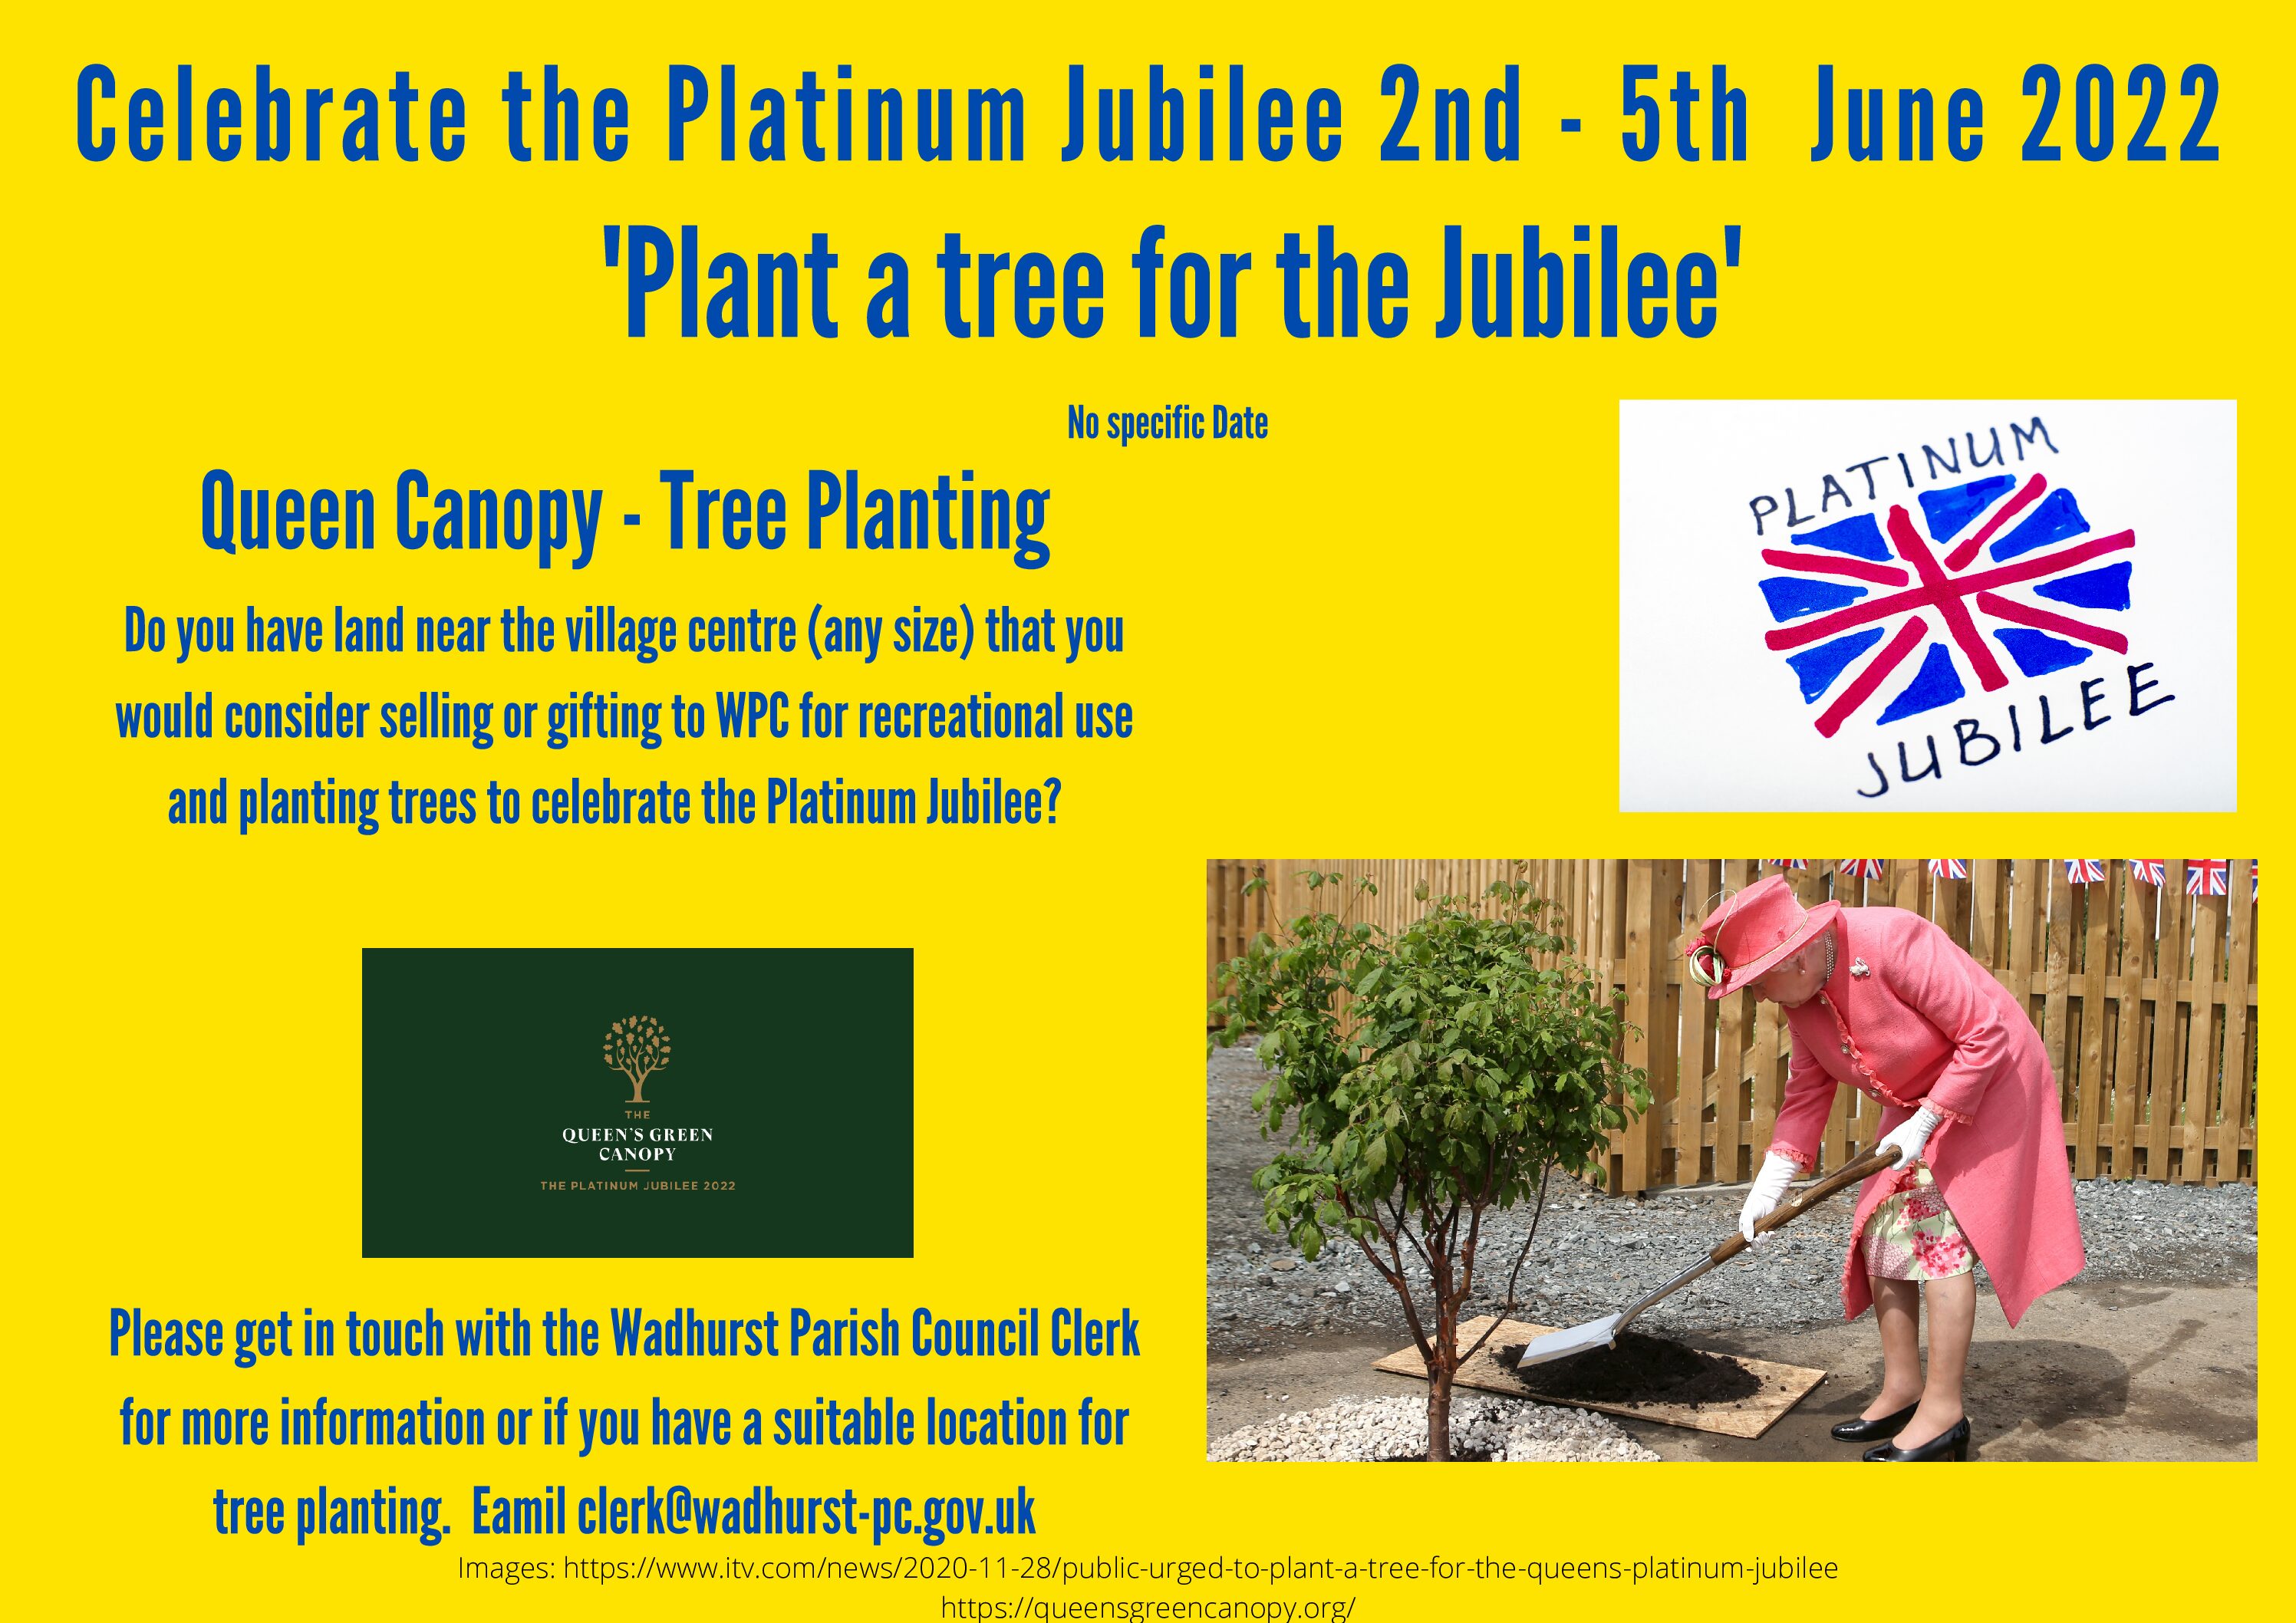 Plant a tree for the Jubilee